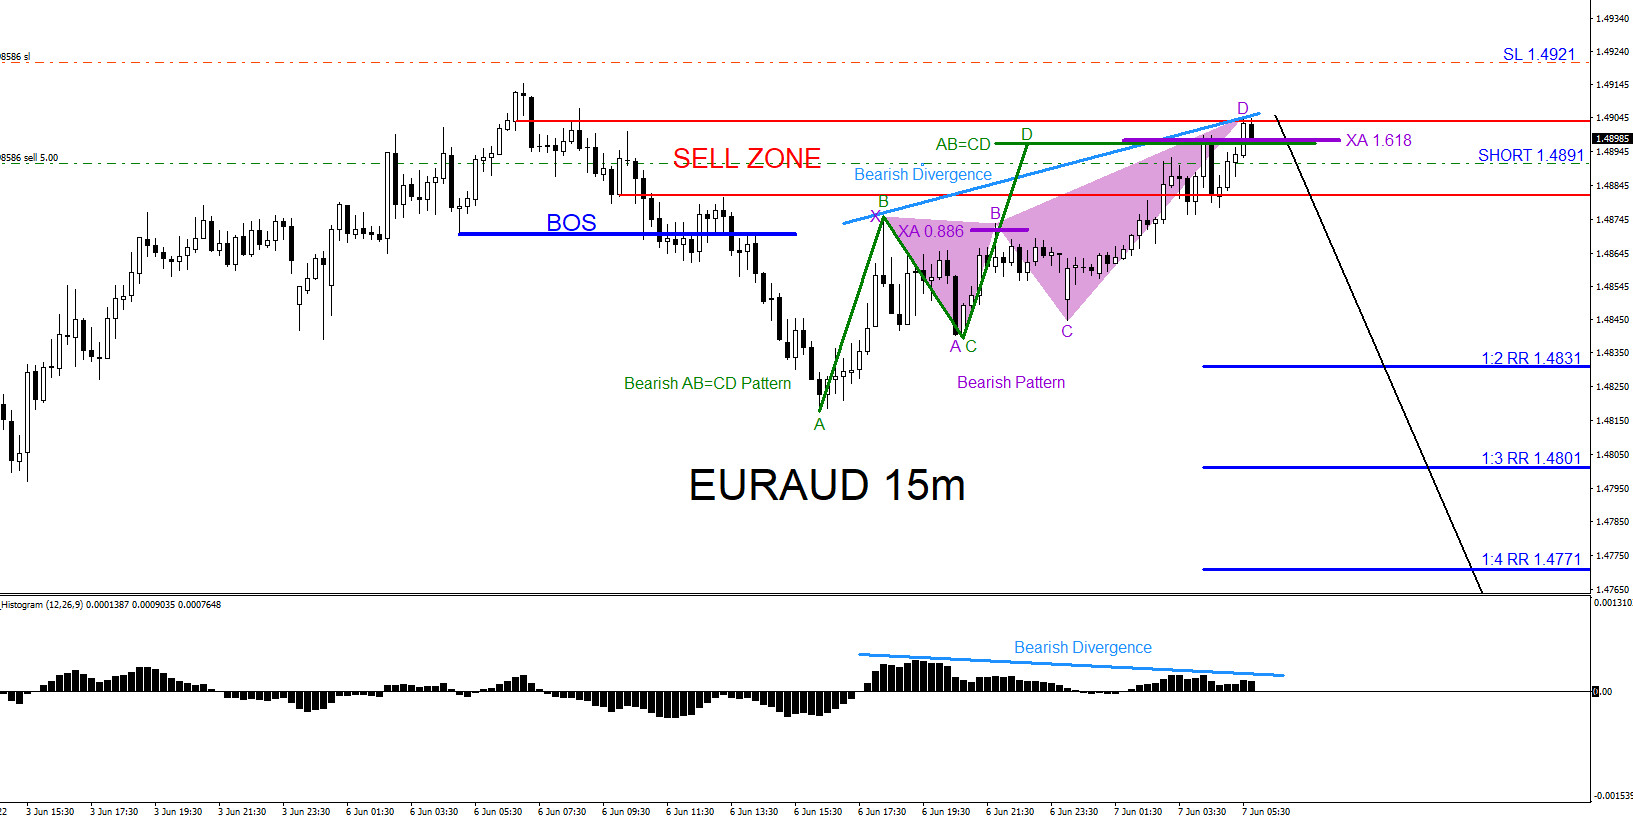 EURAUD : Catching the Sell Setup for a Move Lower